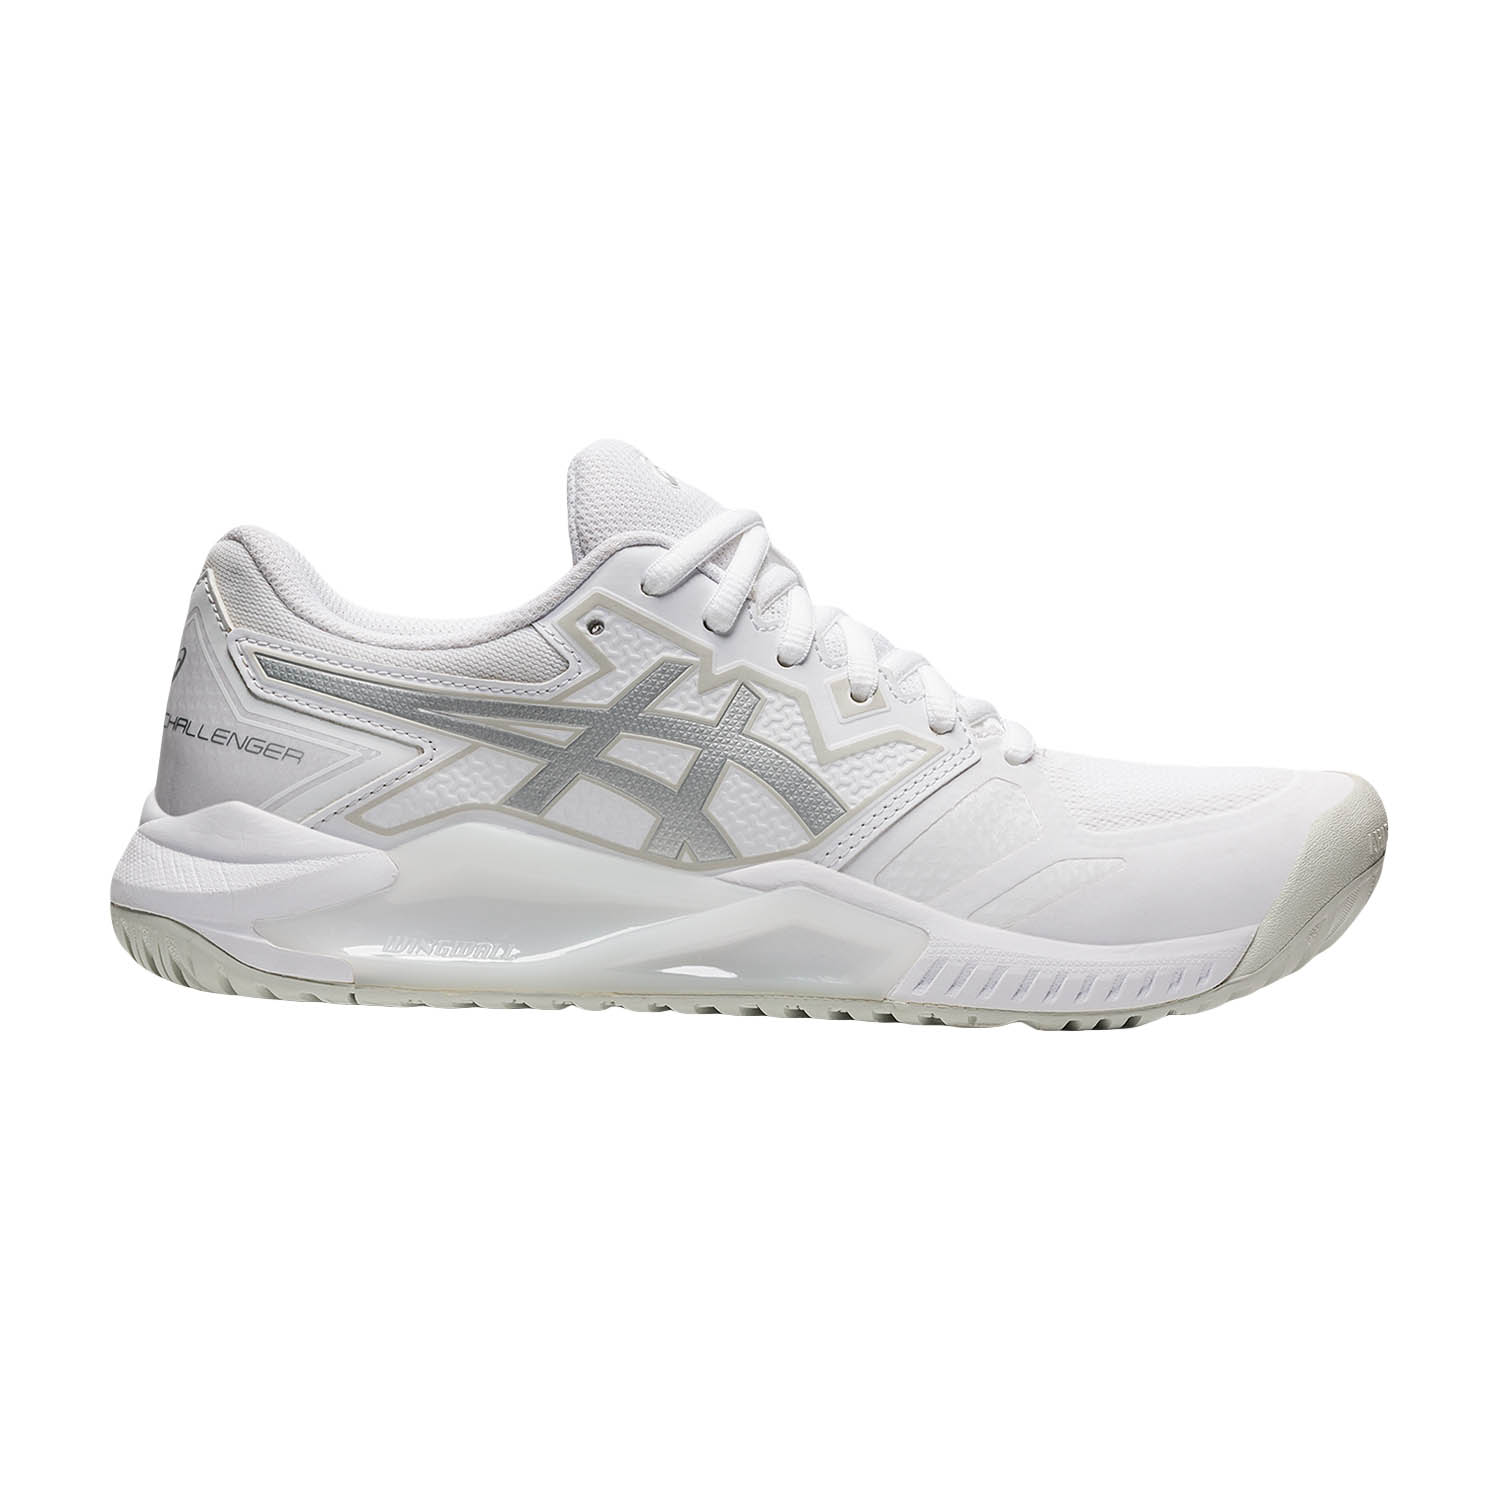 Asics Gel Challenger 13 Women's Tennis Shoes - White/Pure Silver